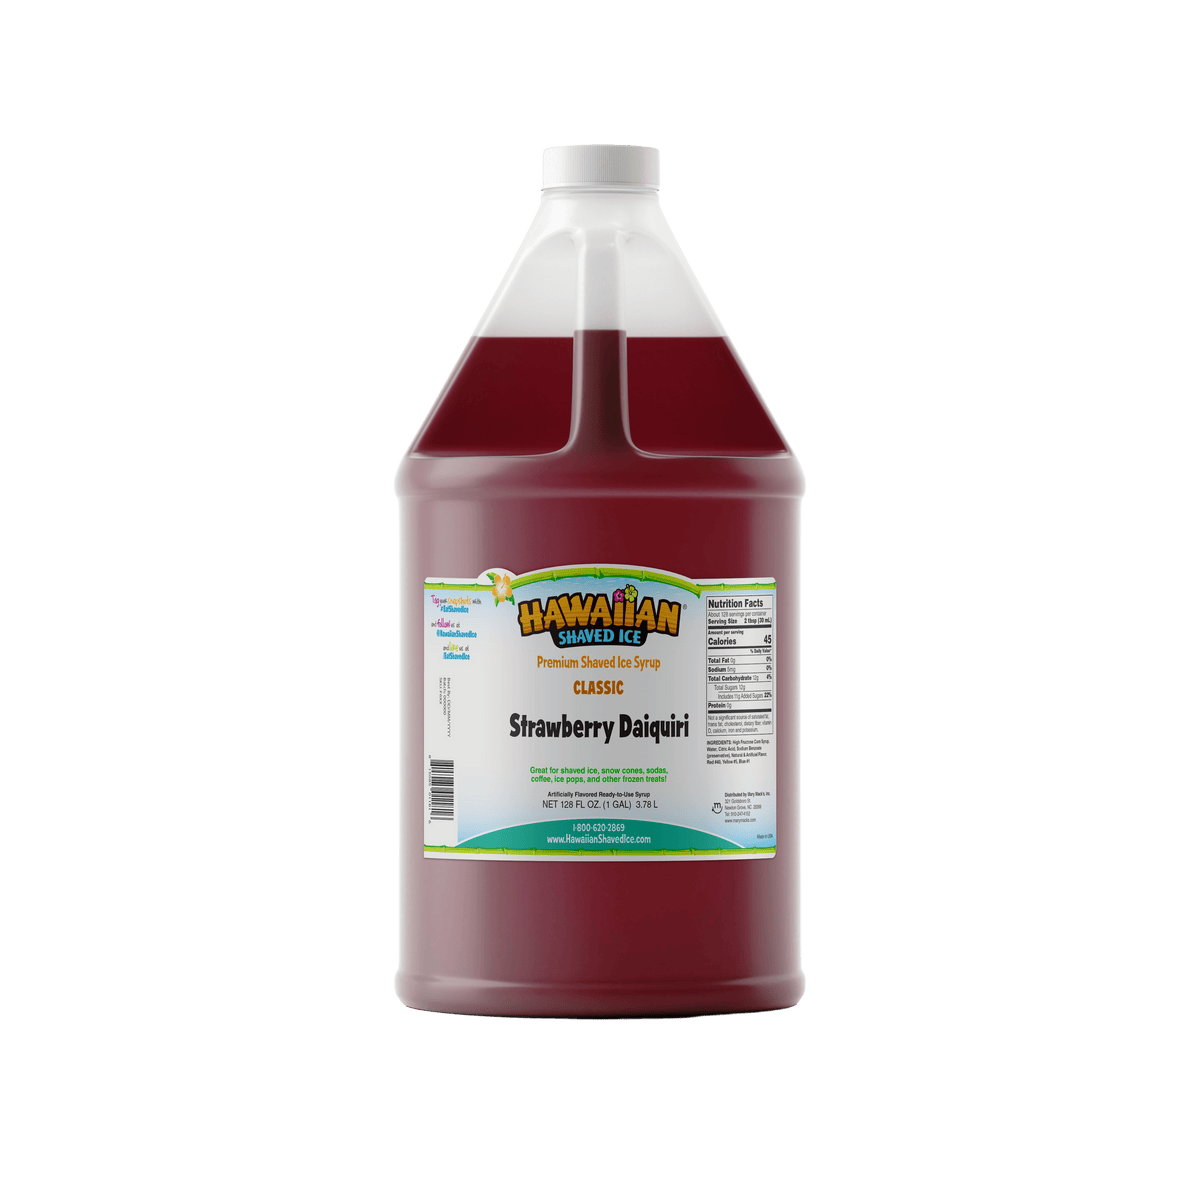 A gallon (128-oz) of Hawaiian Shaved Ice Strawberry Daiquiri Flavored syrup, Red